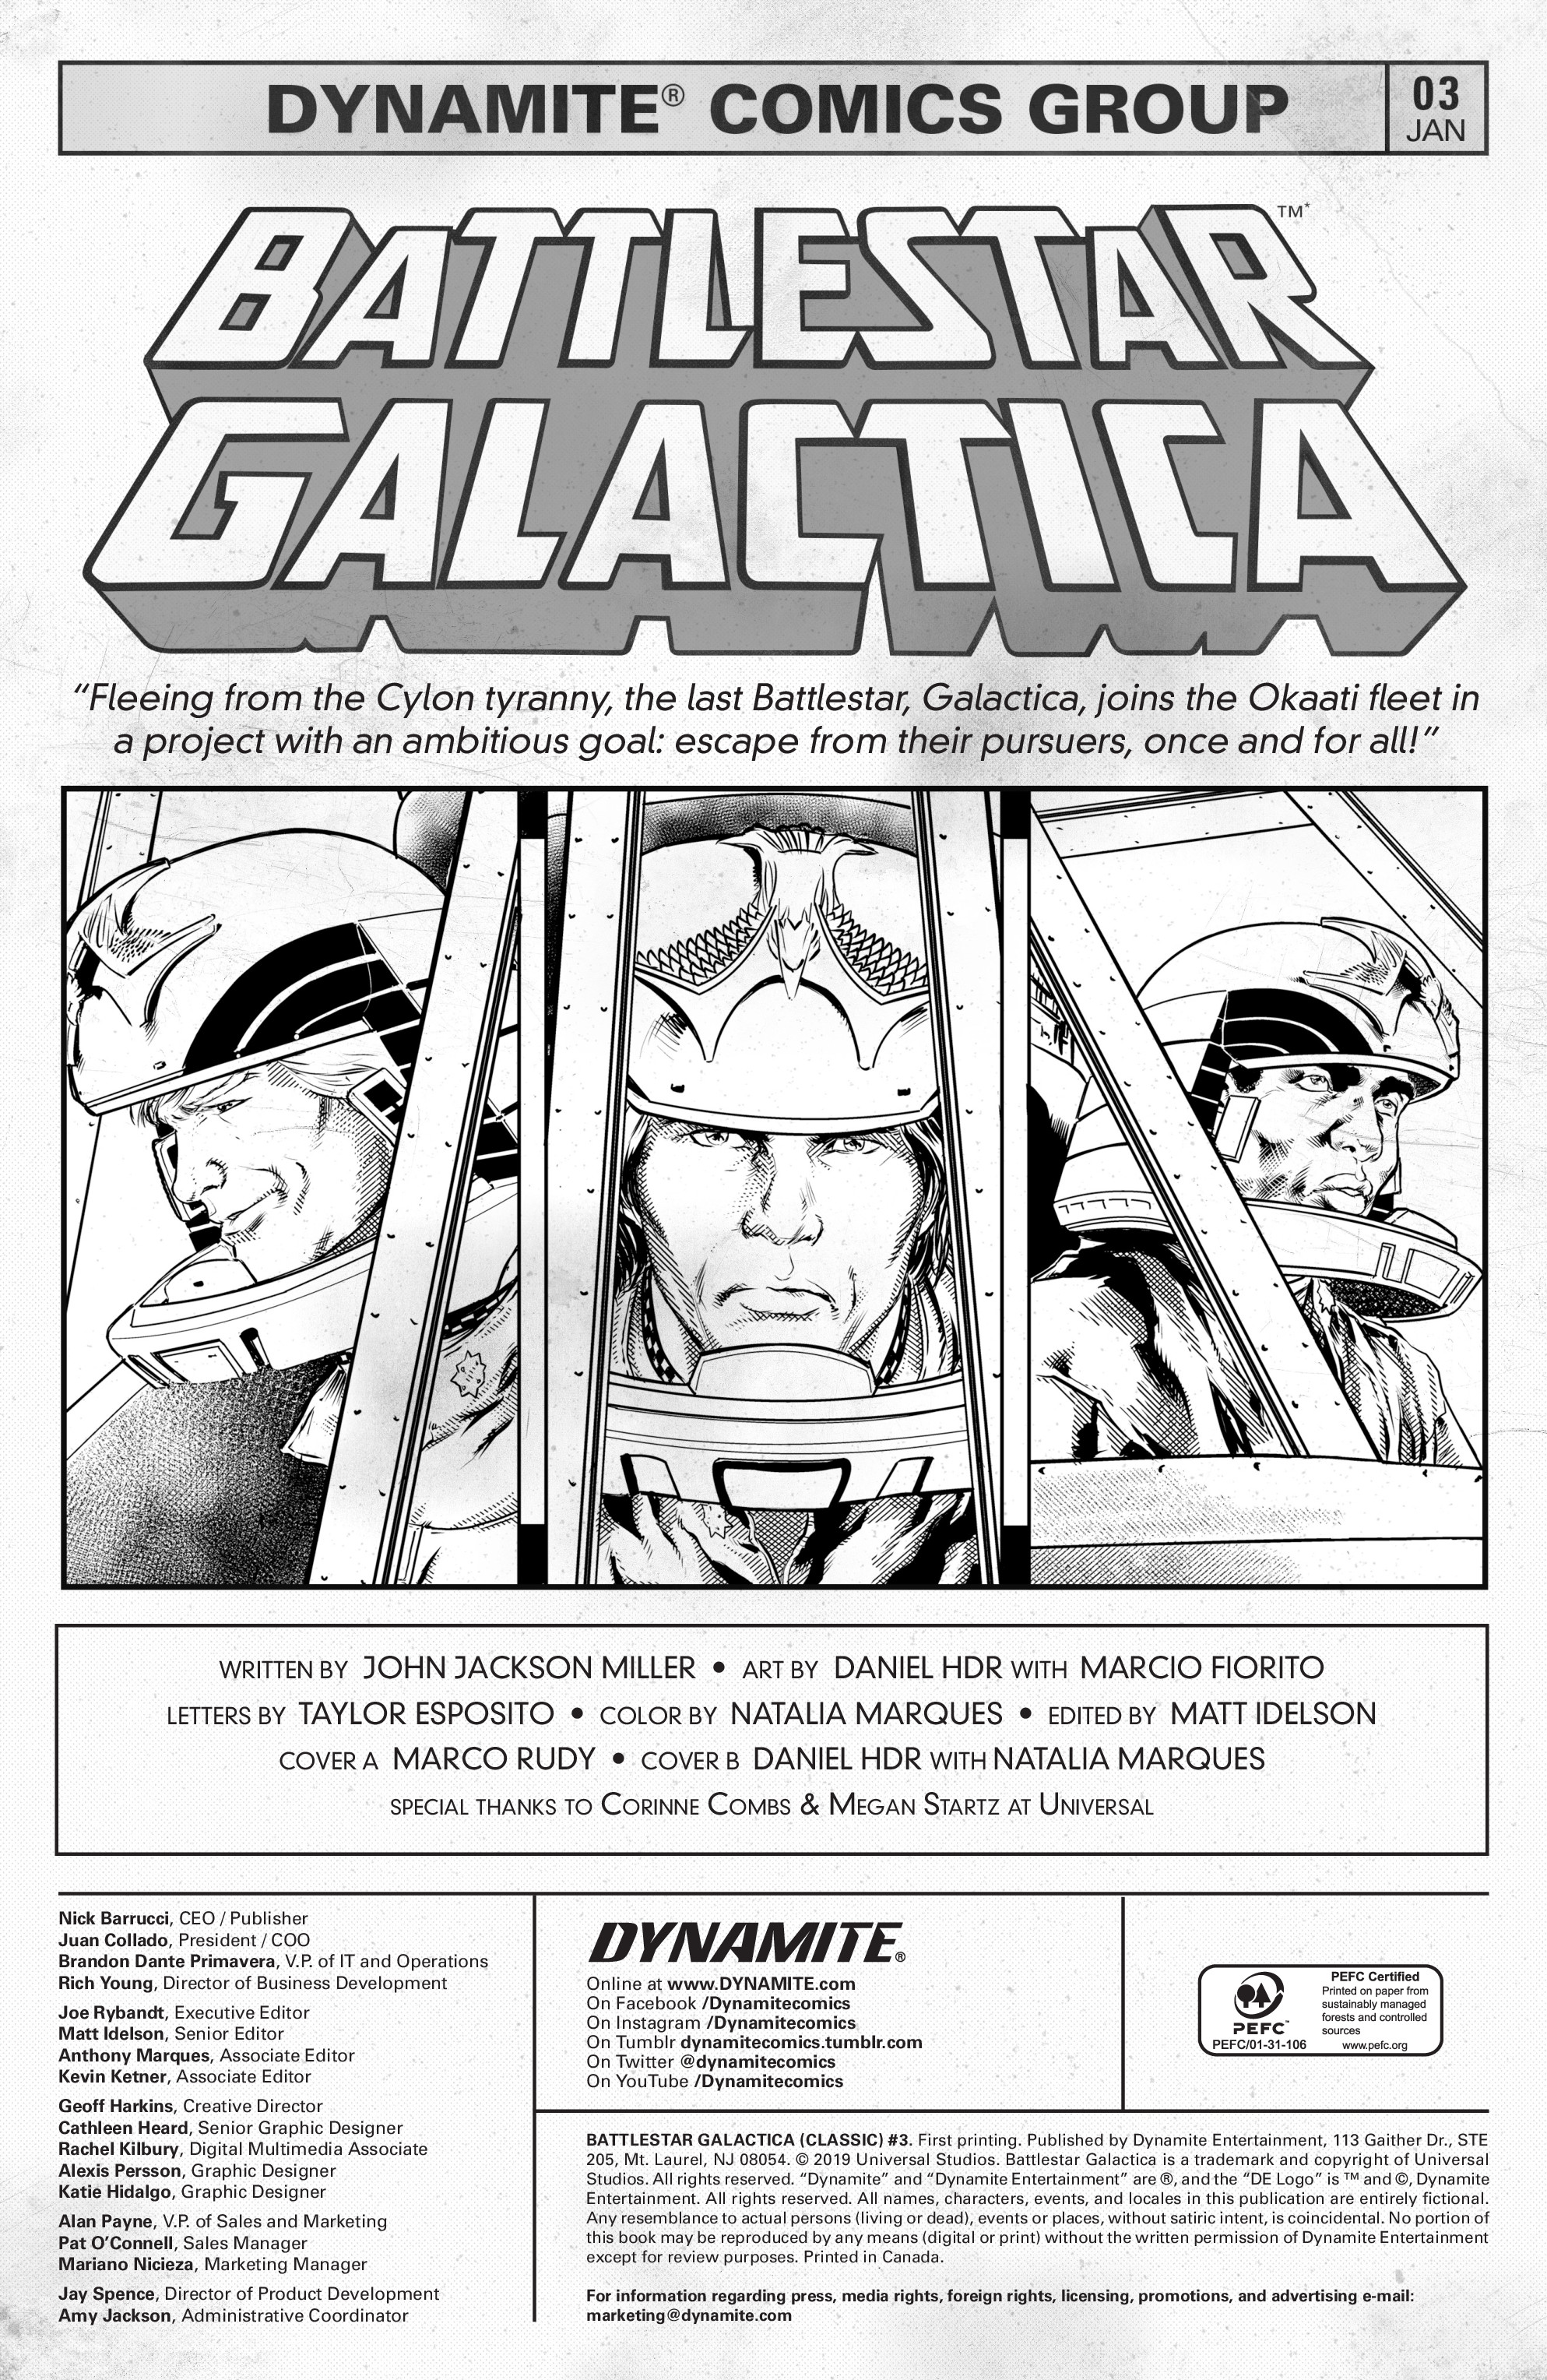 Battlestar Galactica: Classic (2018-): Chapter 3 - Page 3